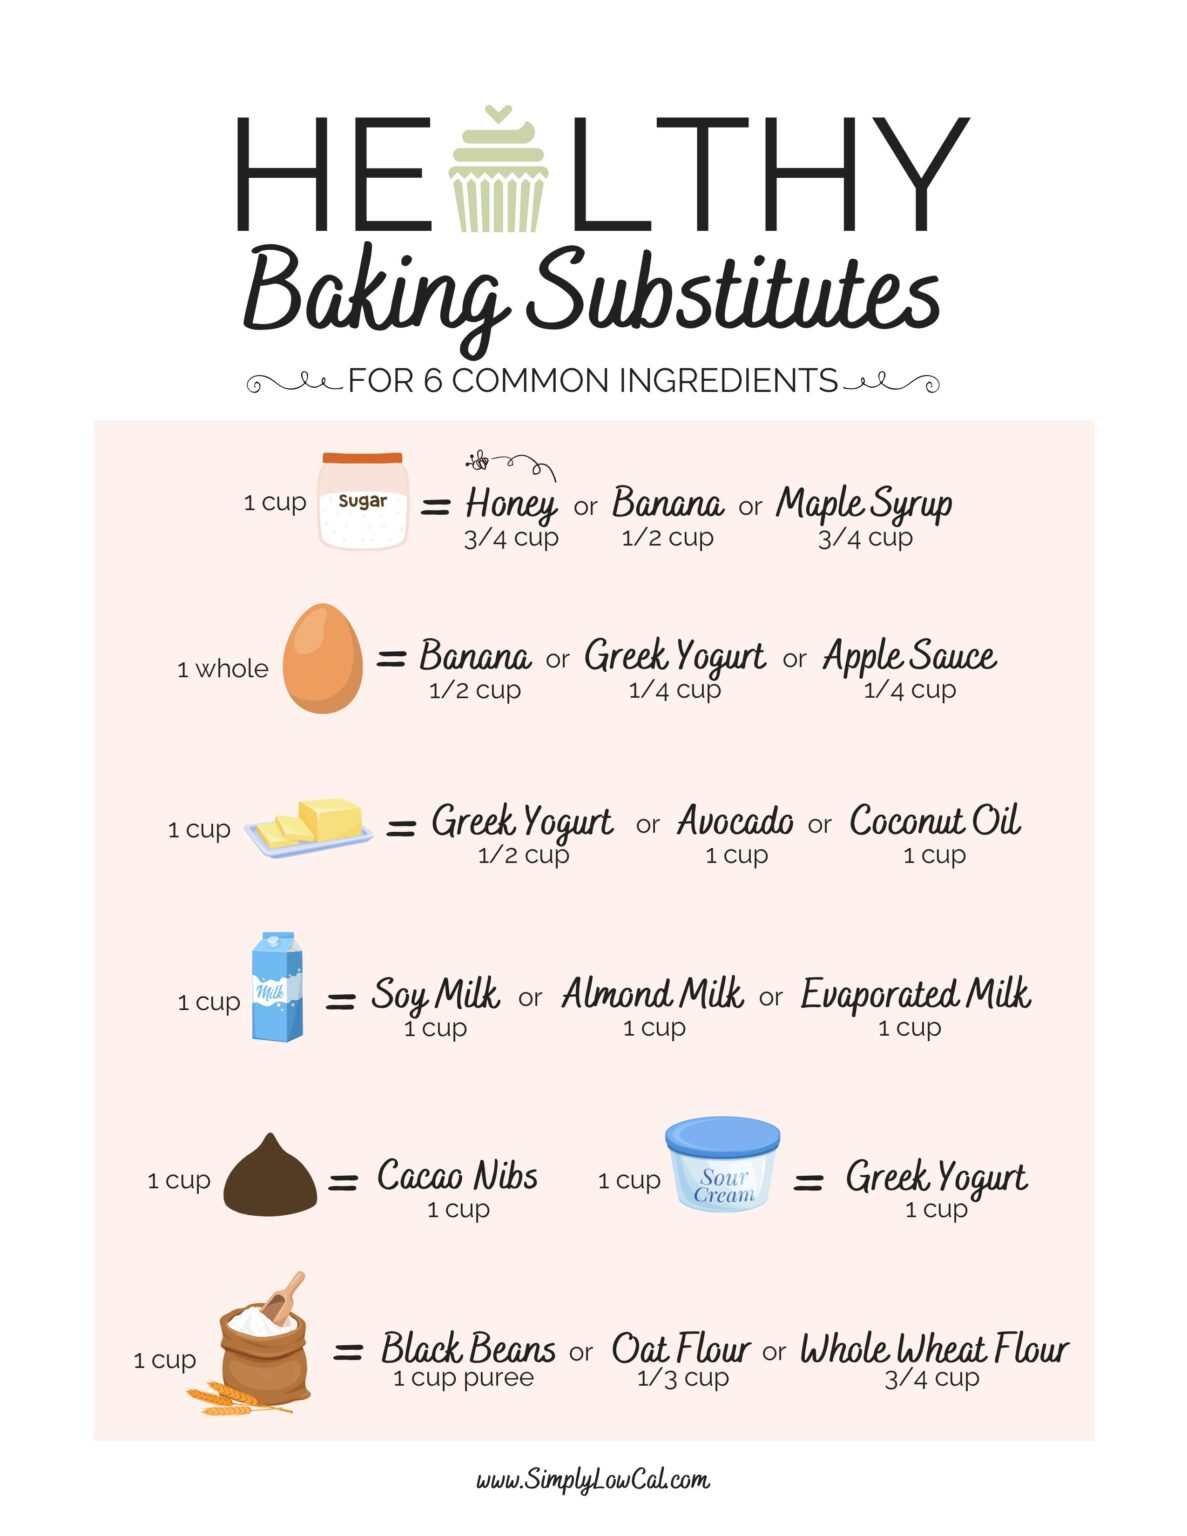 Substitutes For Chocolate Chips - Simply Low Cal